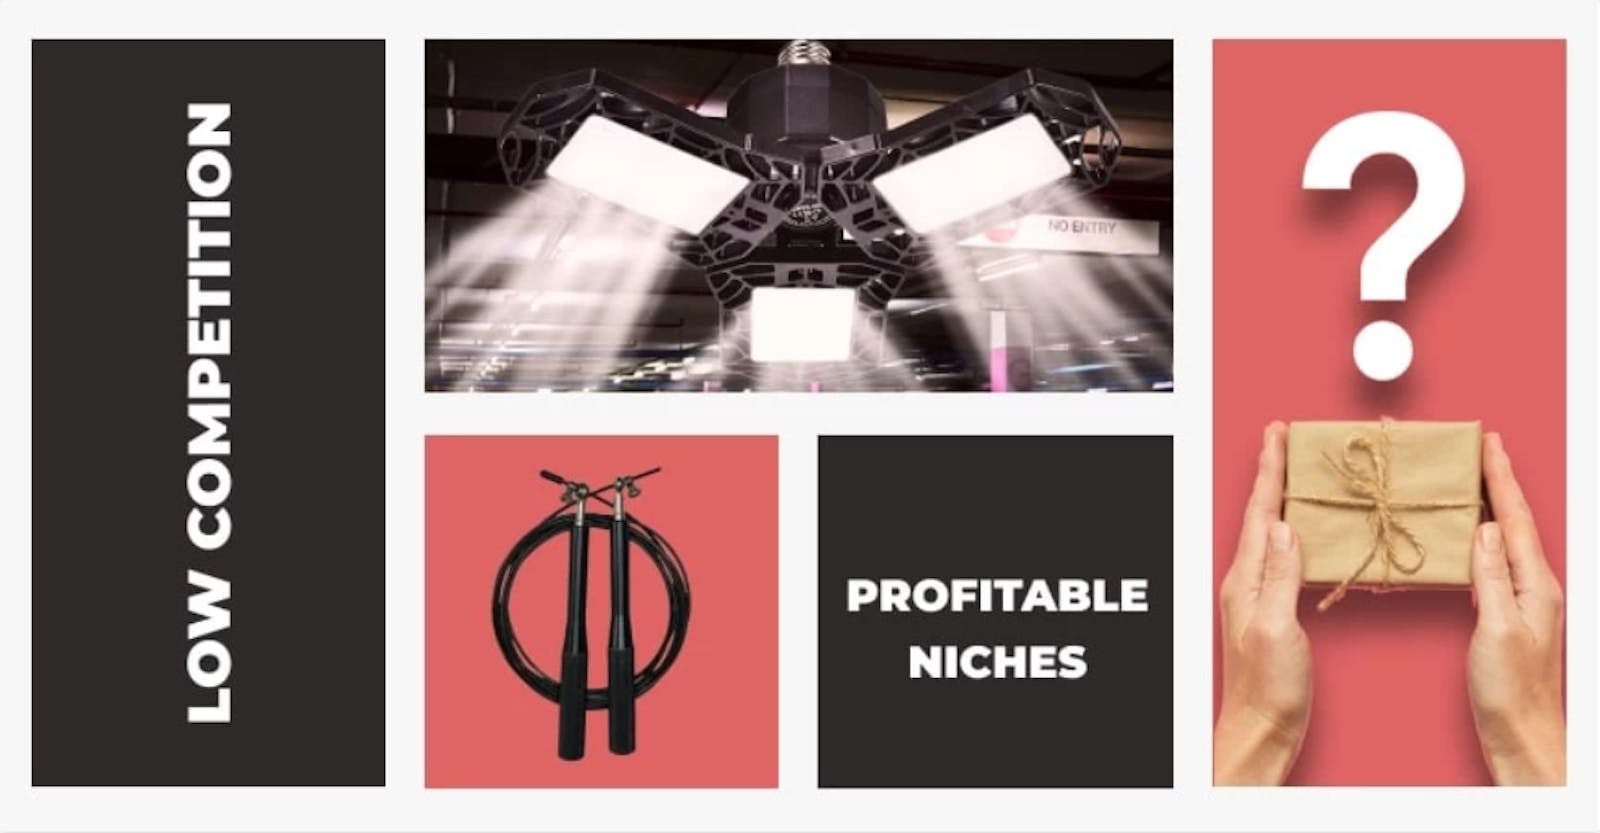 7 Most Profitable Niches With High Demand [#5 with very low competition]